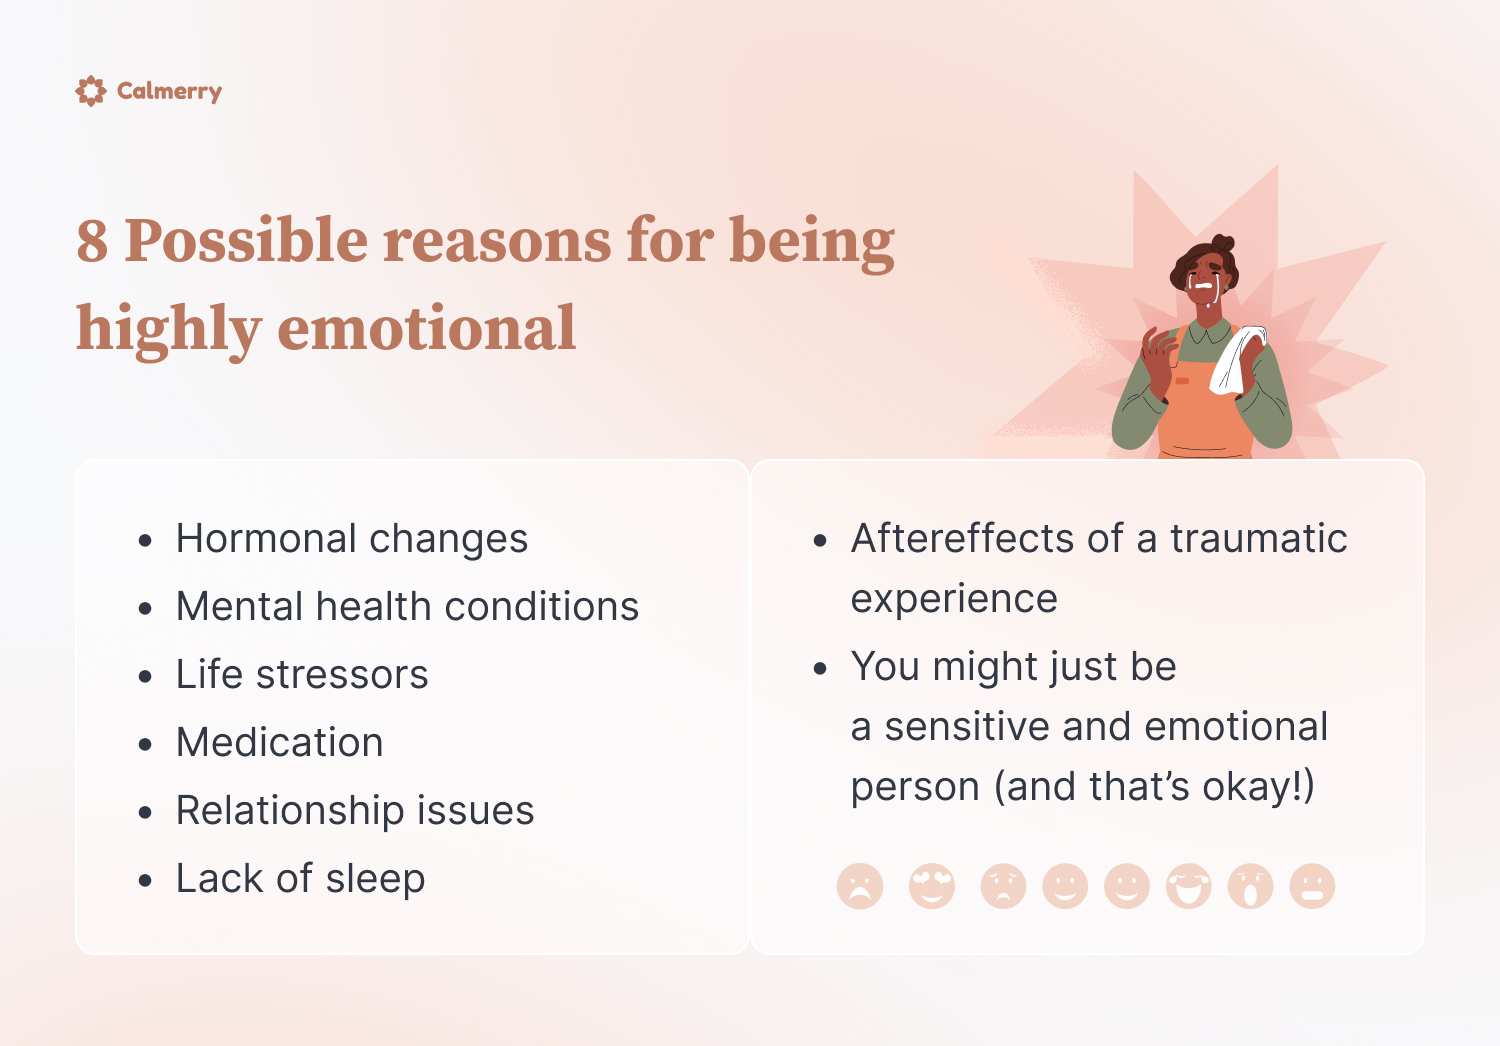 8 Possible reasons for being highly emotional

Hormonal changes
Mental health conditions
Life stressors
Medication
Relationship issues
Lack of sleep
Aftereffects of a traumatic experience
You might just be a sensitive and emotional person (and that’s okay!)